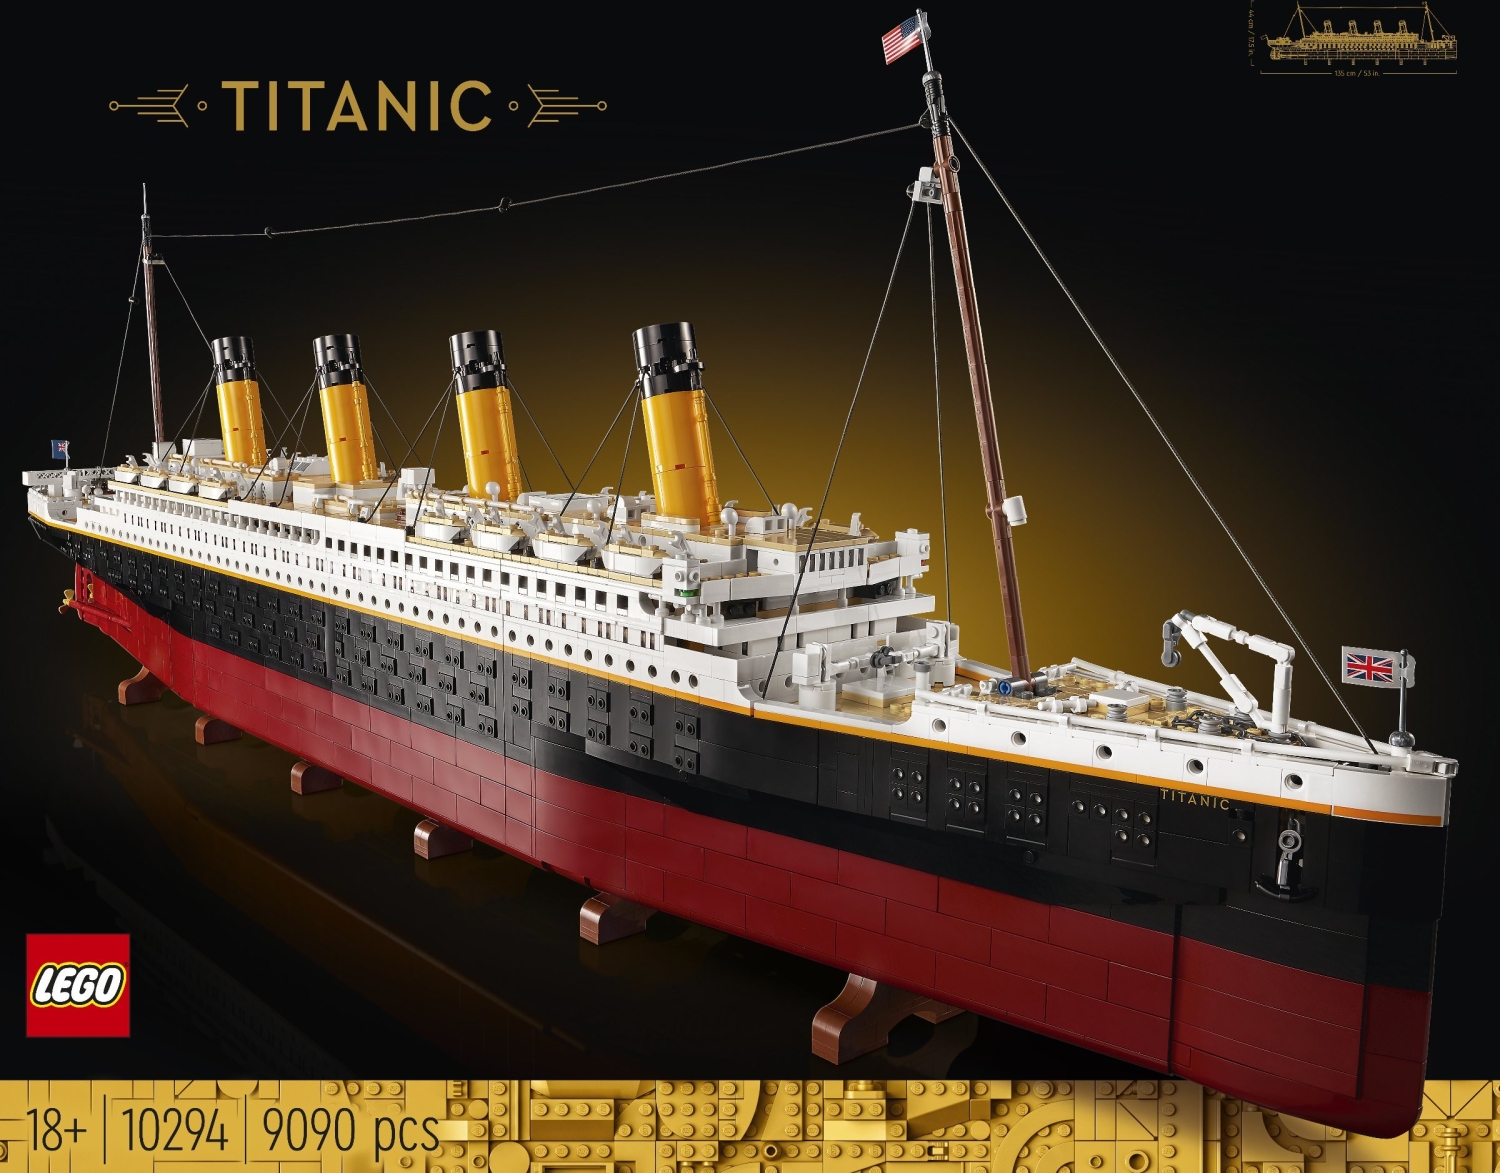 LEGO's new Titanic set is massive, has 9090 pieces and costs $630